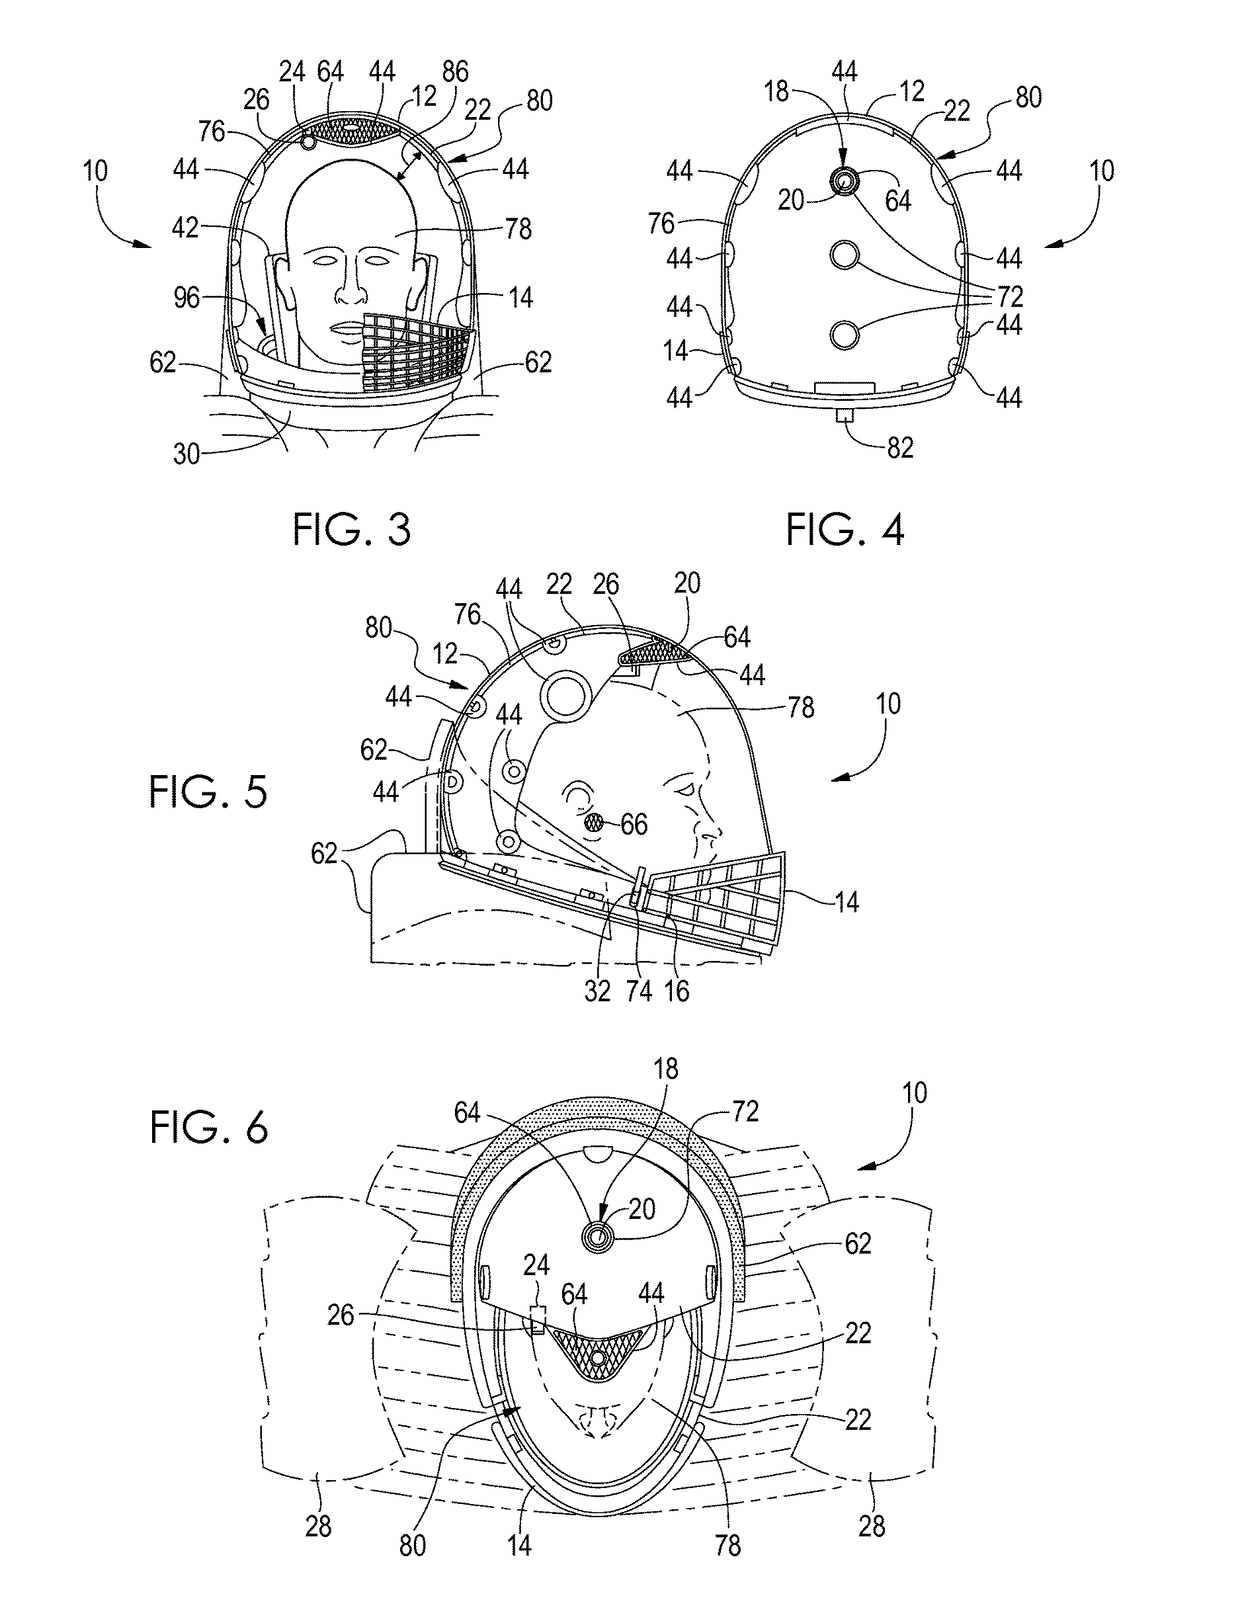 Method and apparatus for improved helmet